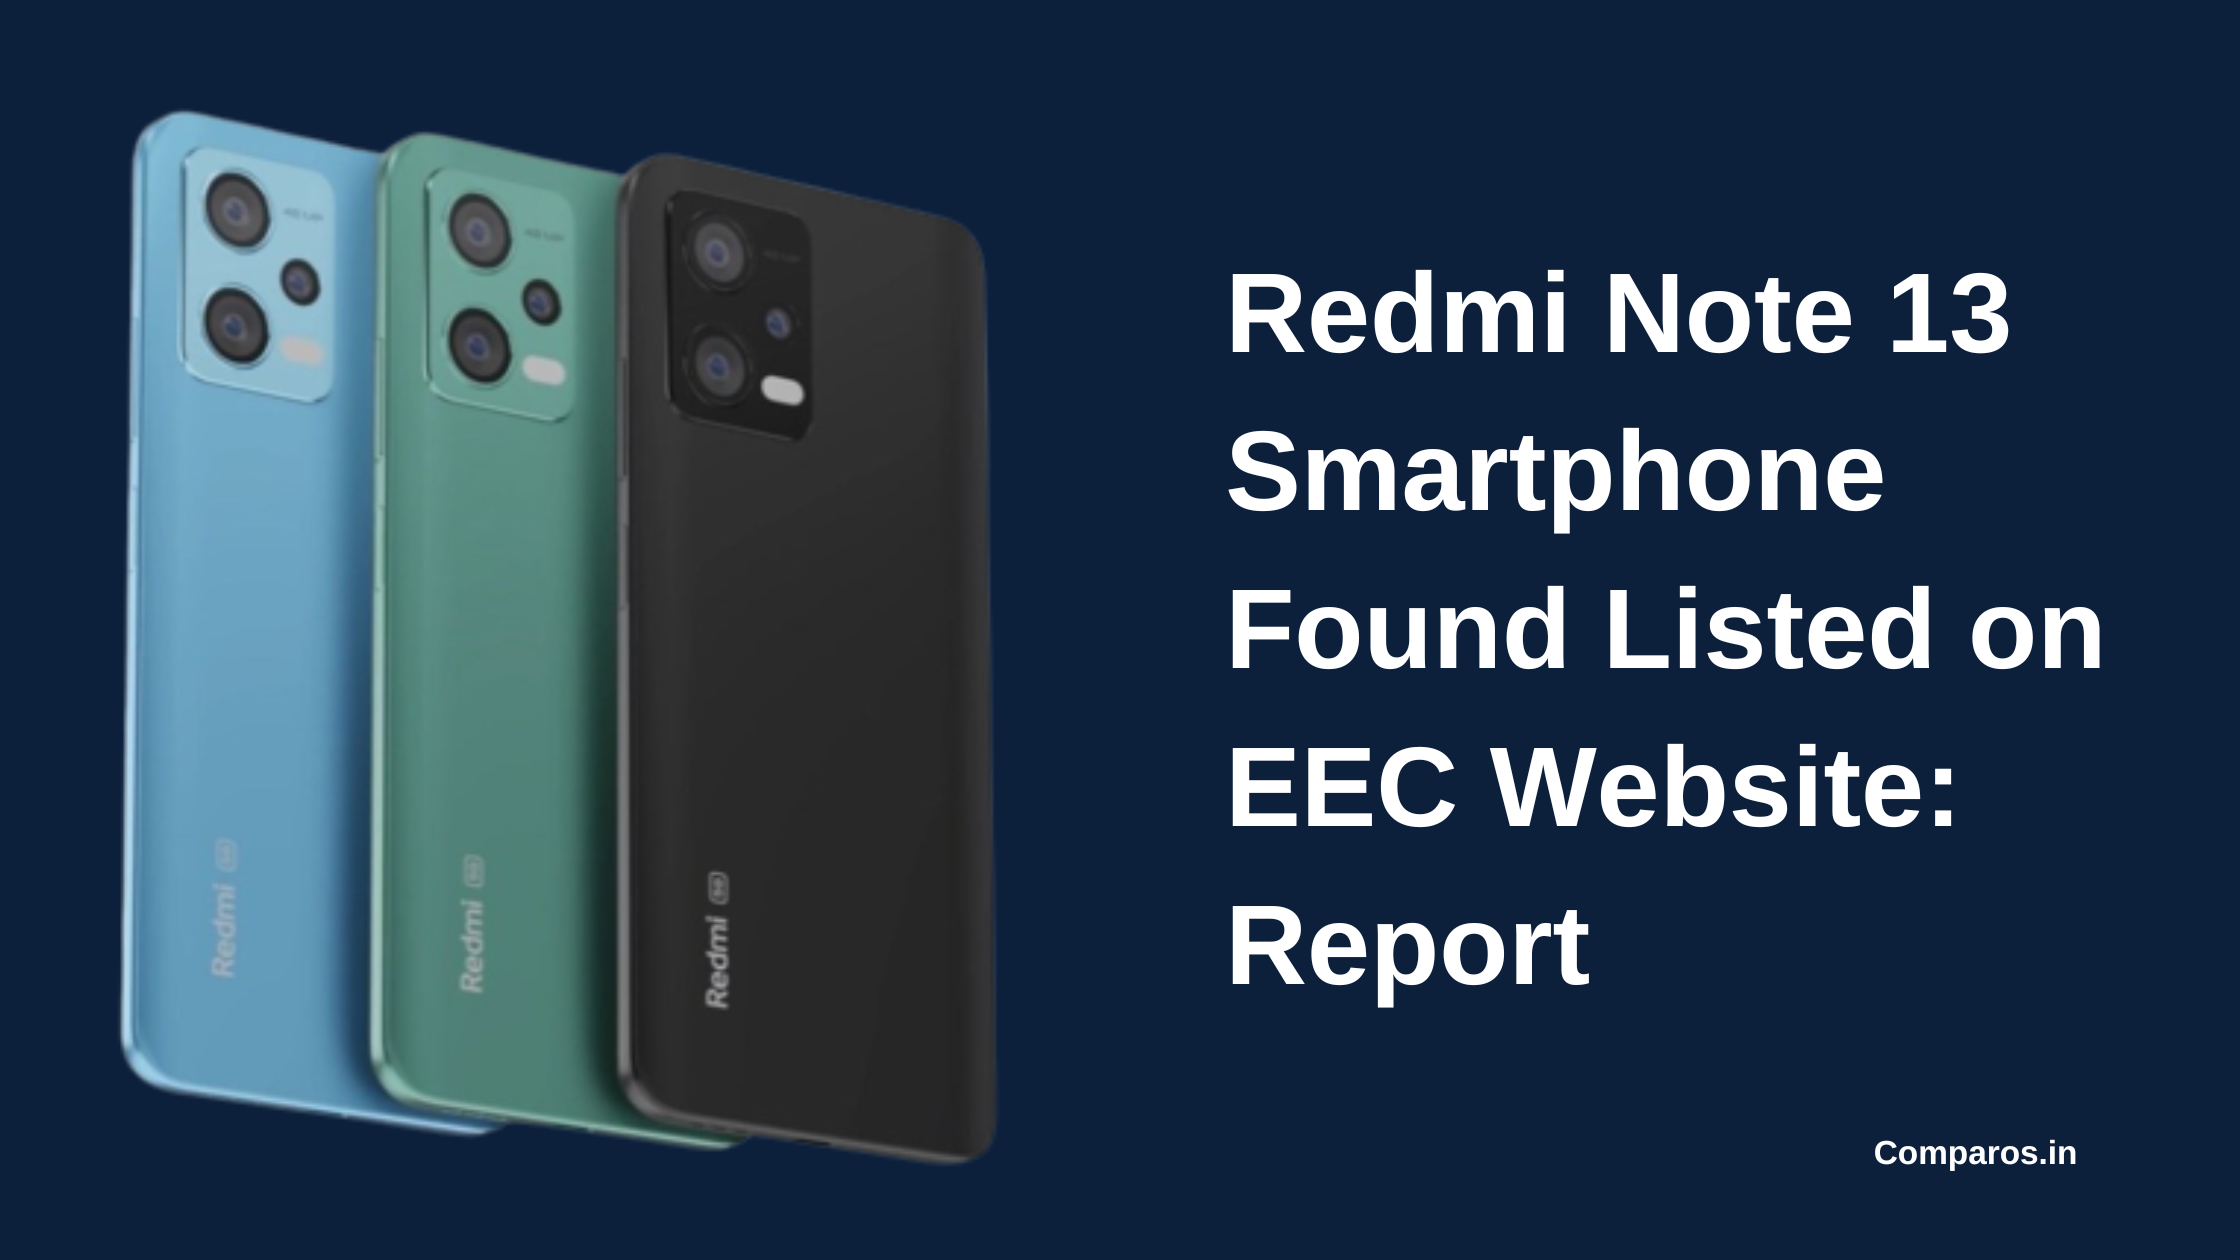 Redmi Note 13 Smartphone Found Listed on EEC Website: Report